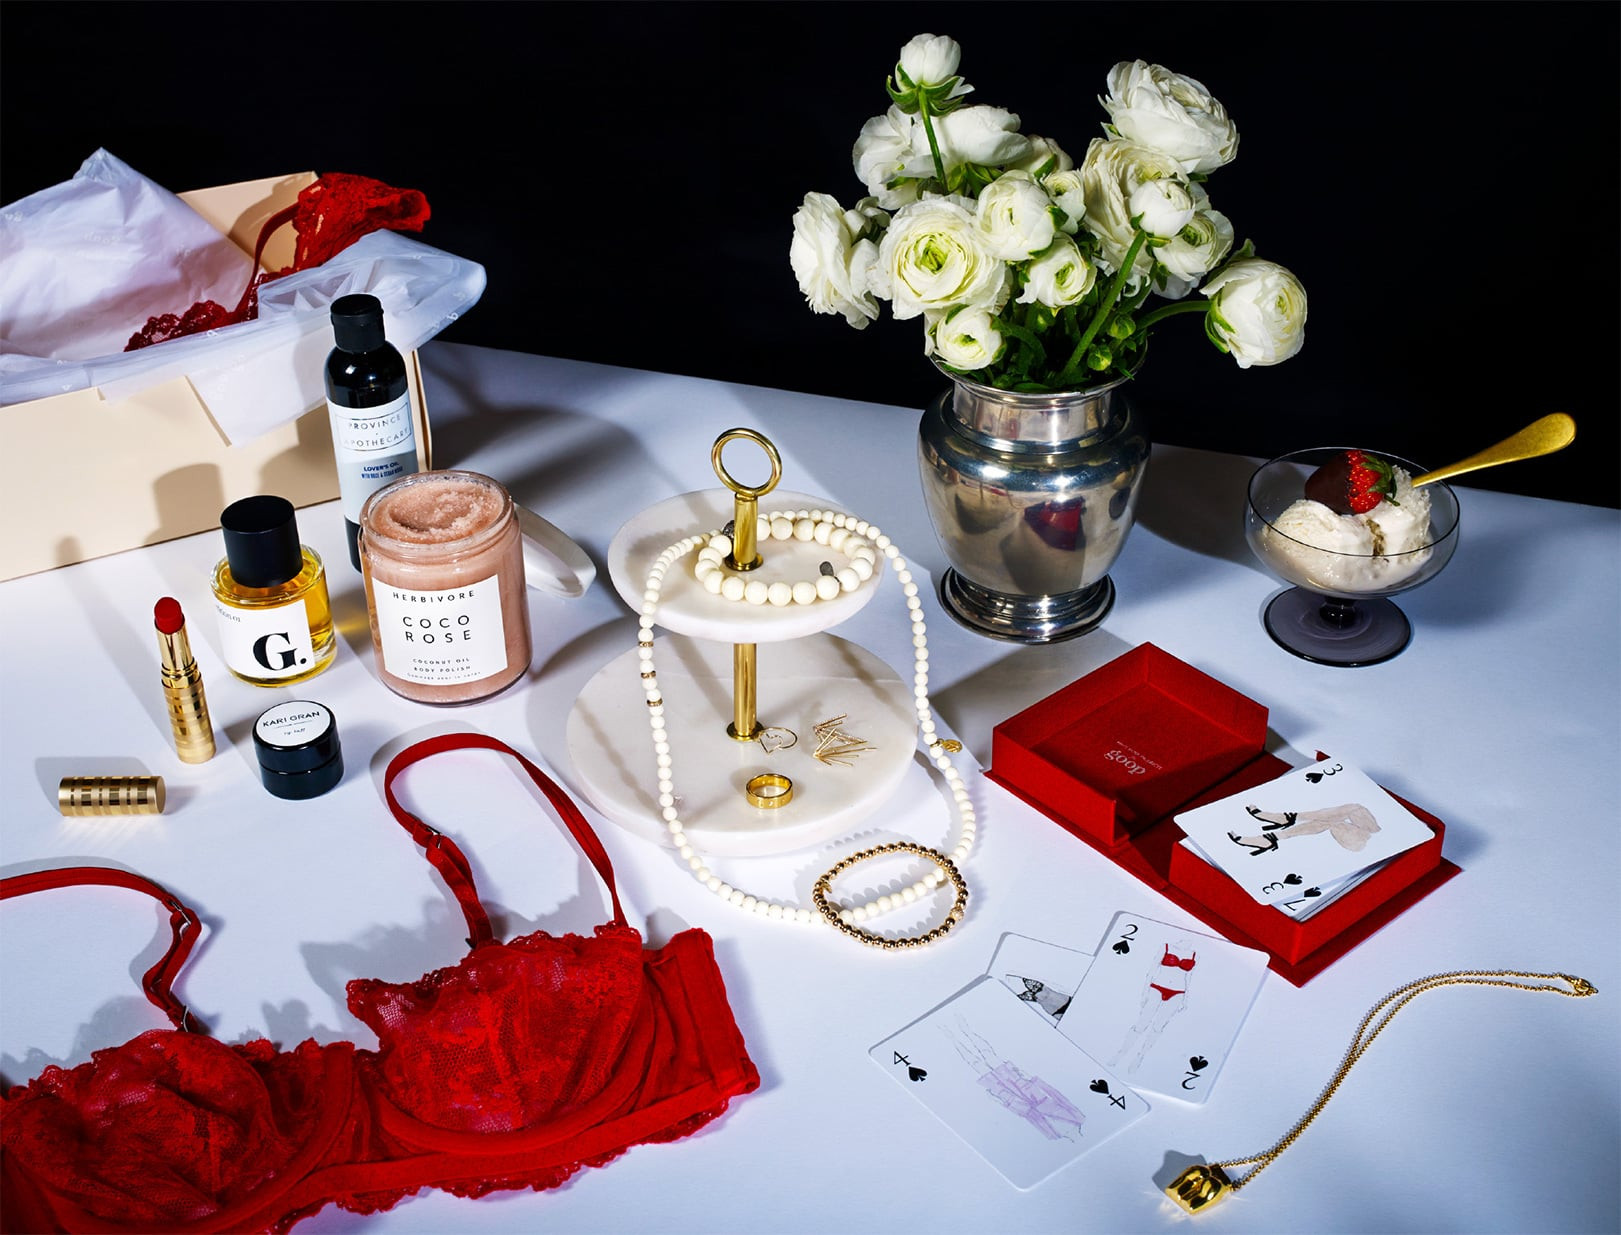 Valentine Gift Ideas For Women
 The Women’s Valentine’s Day Gift Guide